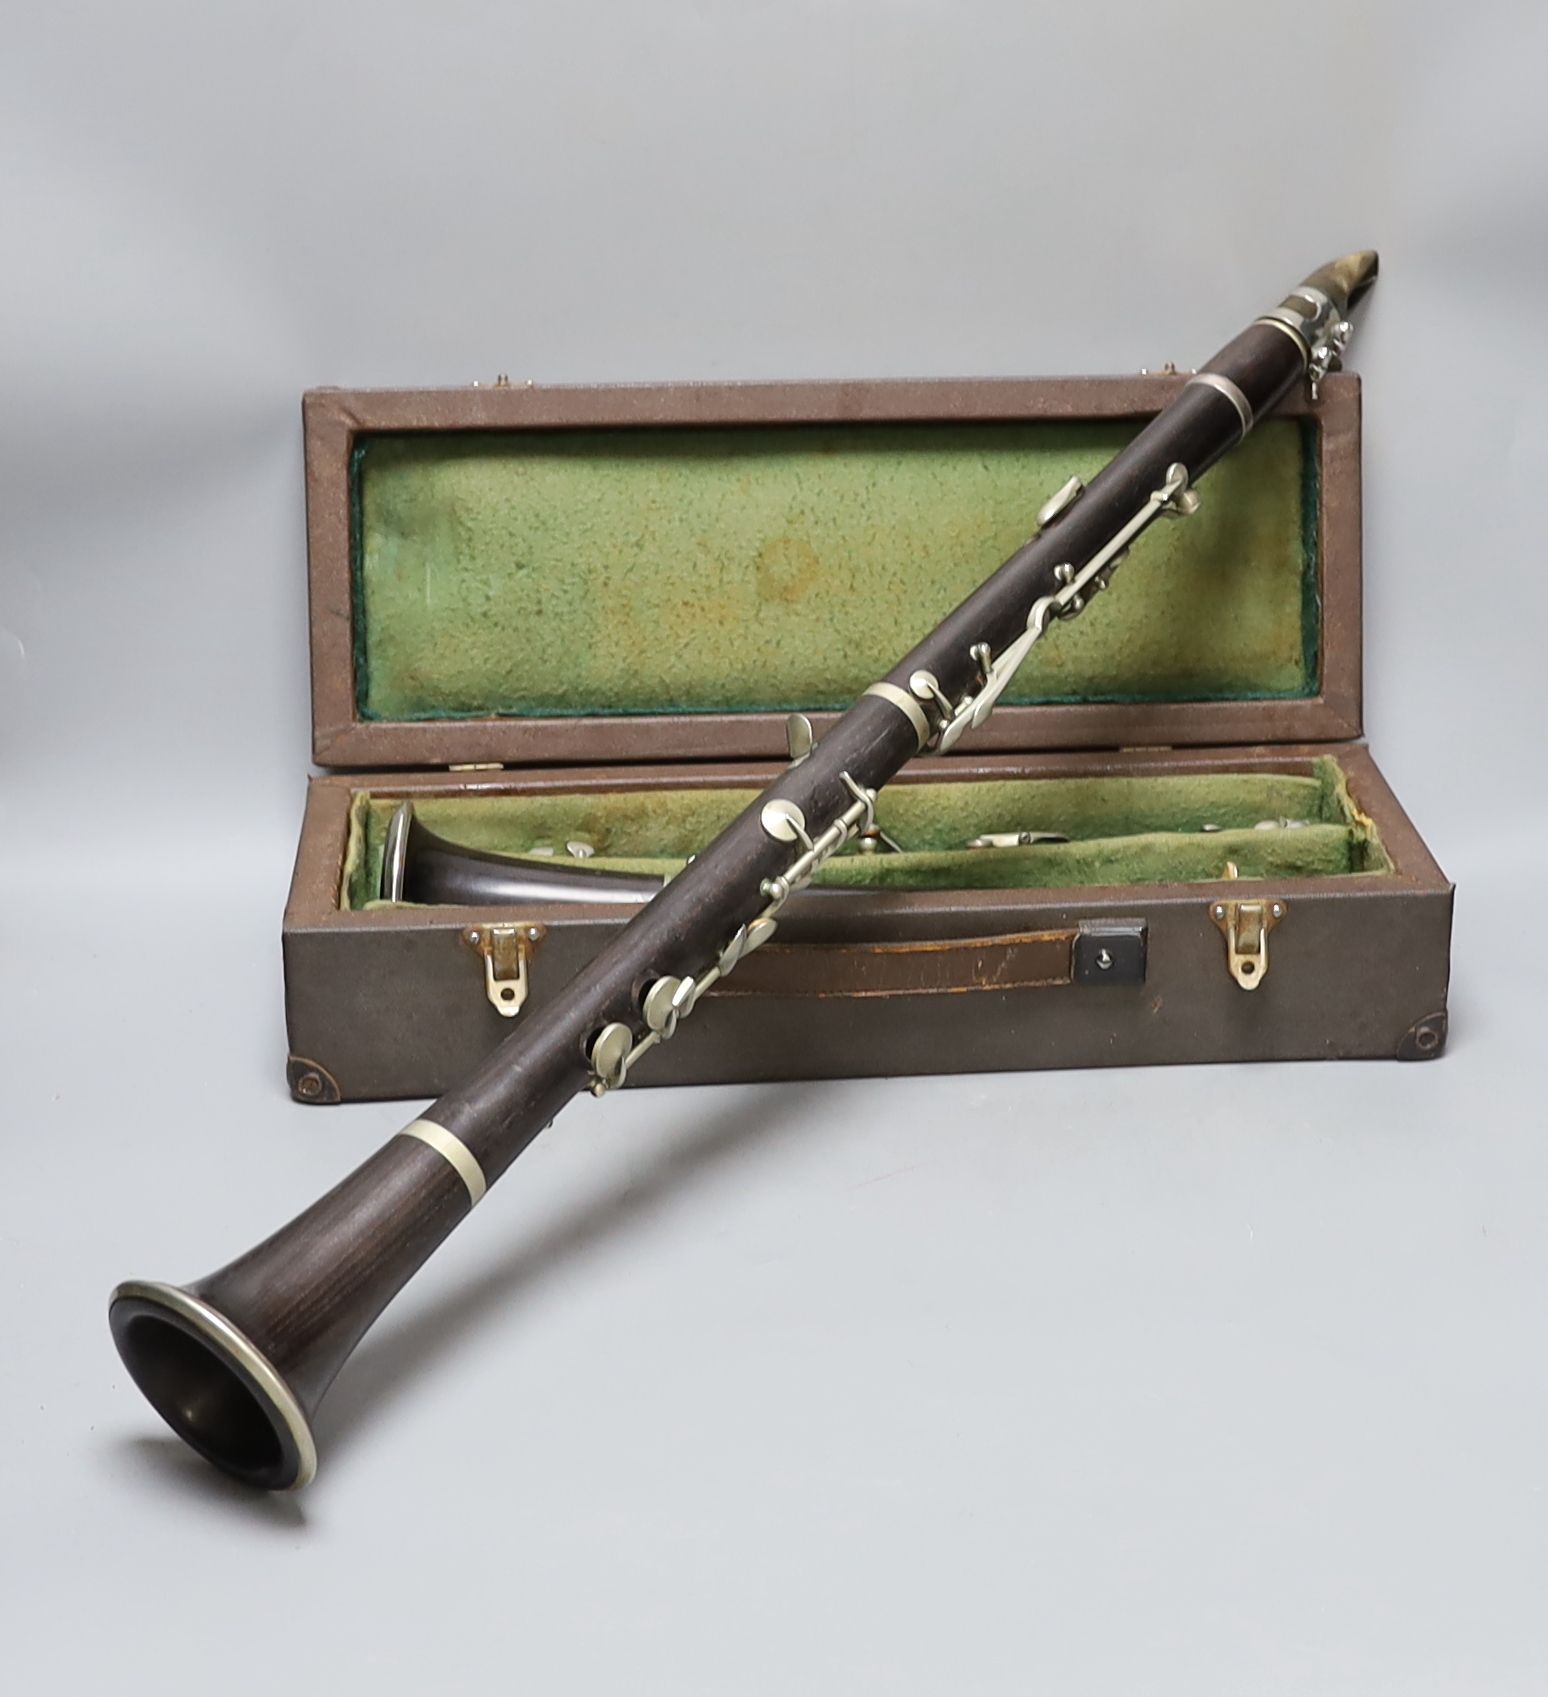 A ‘Superior Class’ Hawkes & Son clarinet and a cased Rampone and Cazzani ‘Judson’ ’ clarinet,67 cm